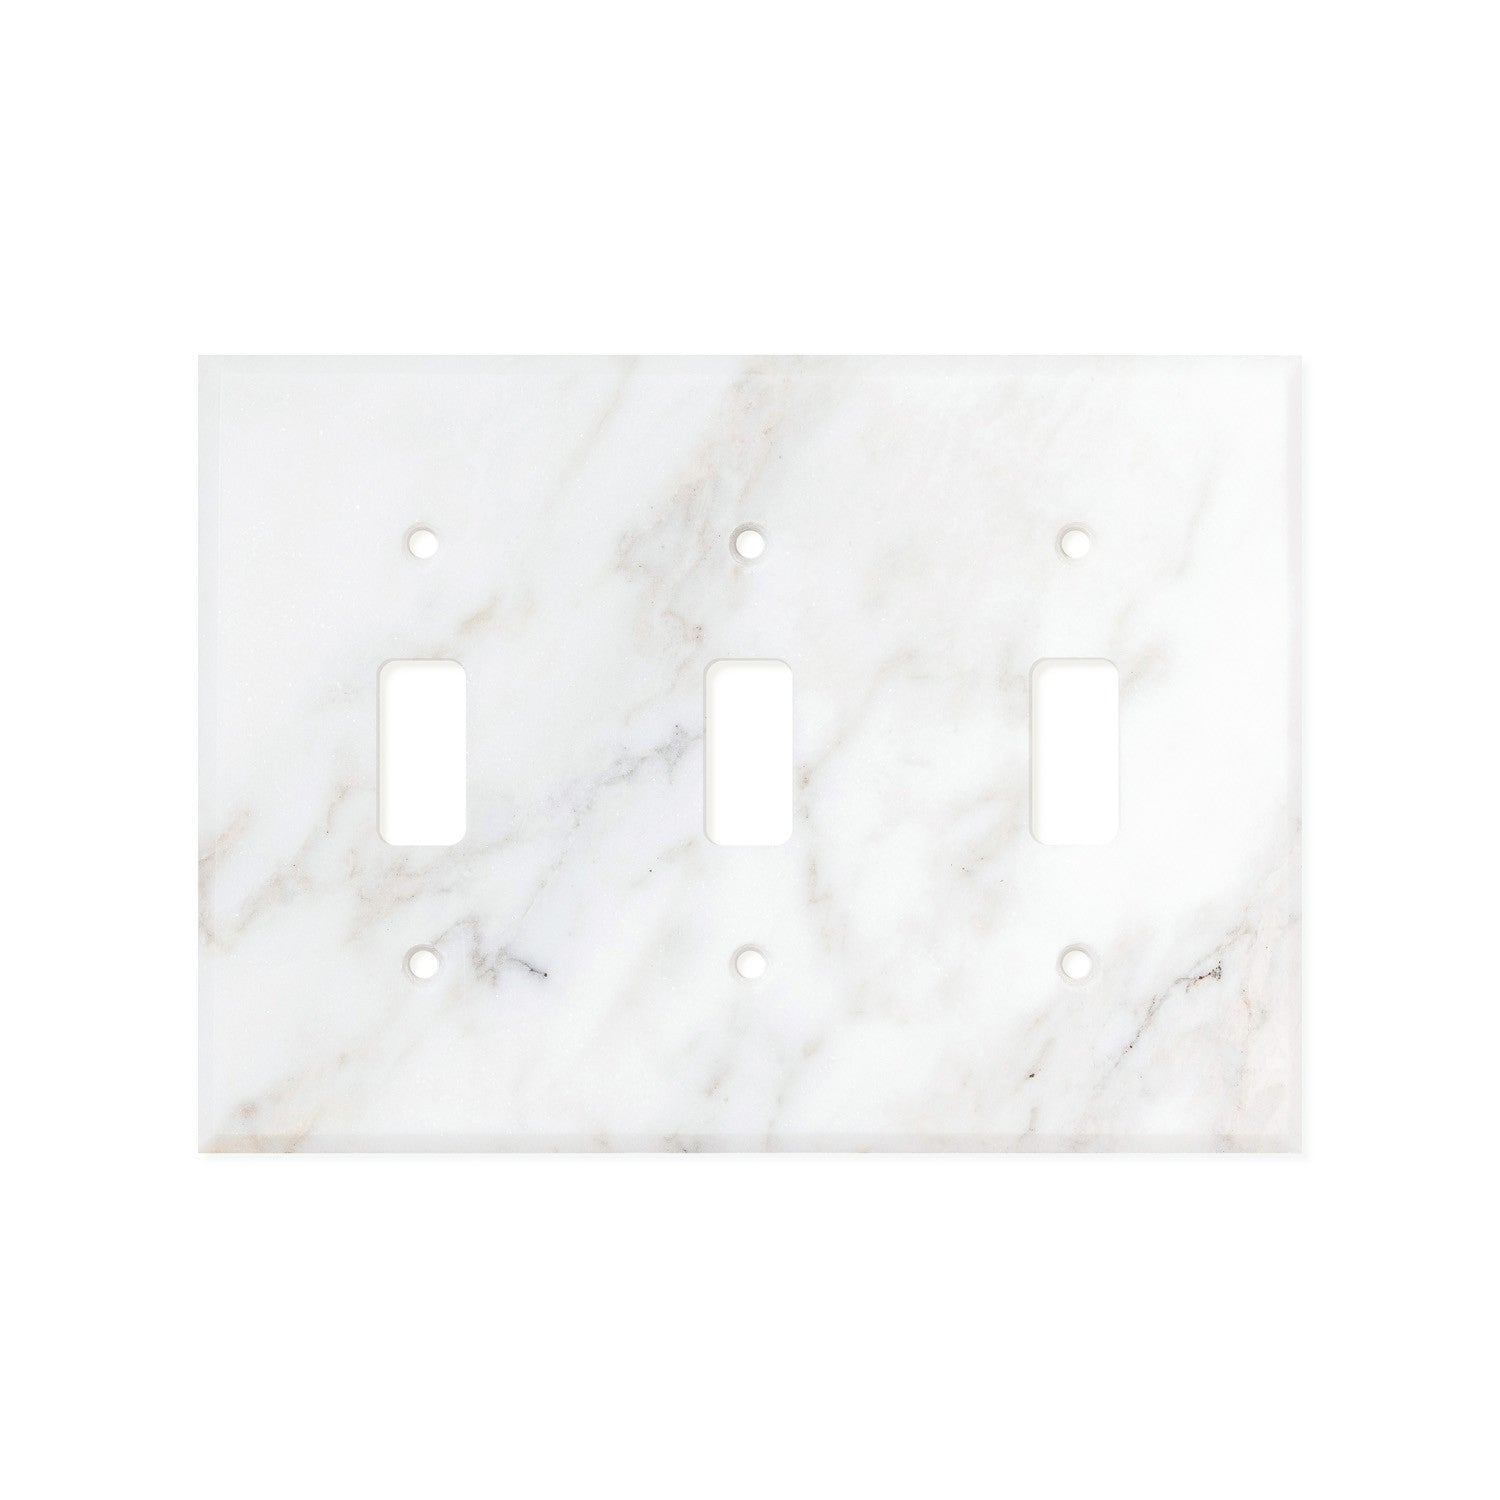 Calacatta Gold Marble Switch Plate Cover, Honed (3 TOGGLE) - Tilephile